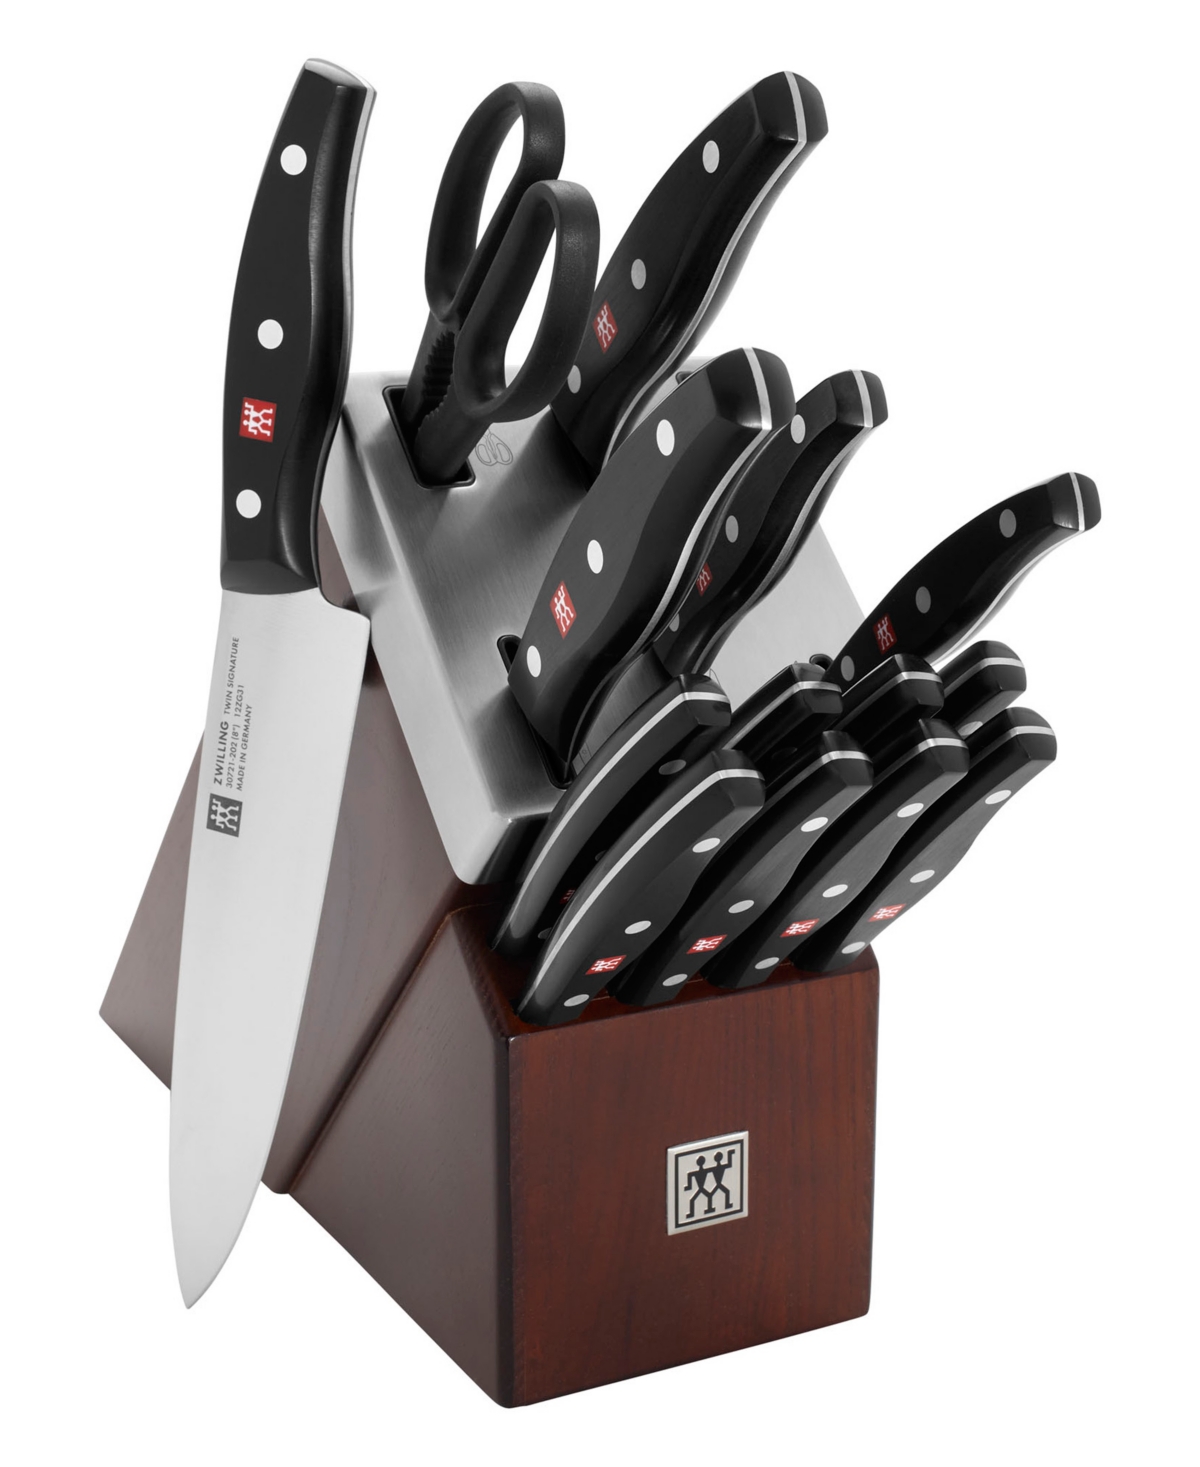 Zwilling Twin Signature 15-piece Self-sharpening Knife Block Set In Brown